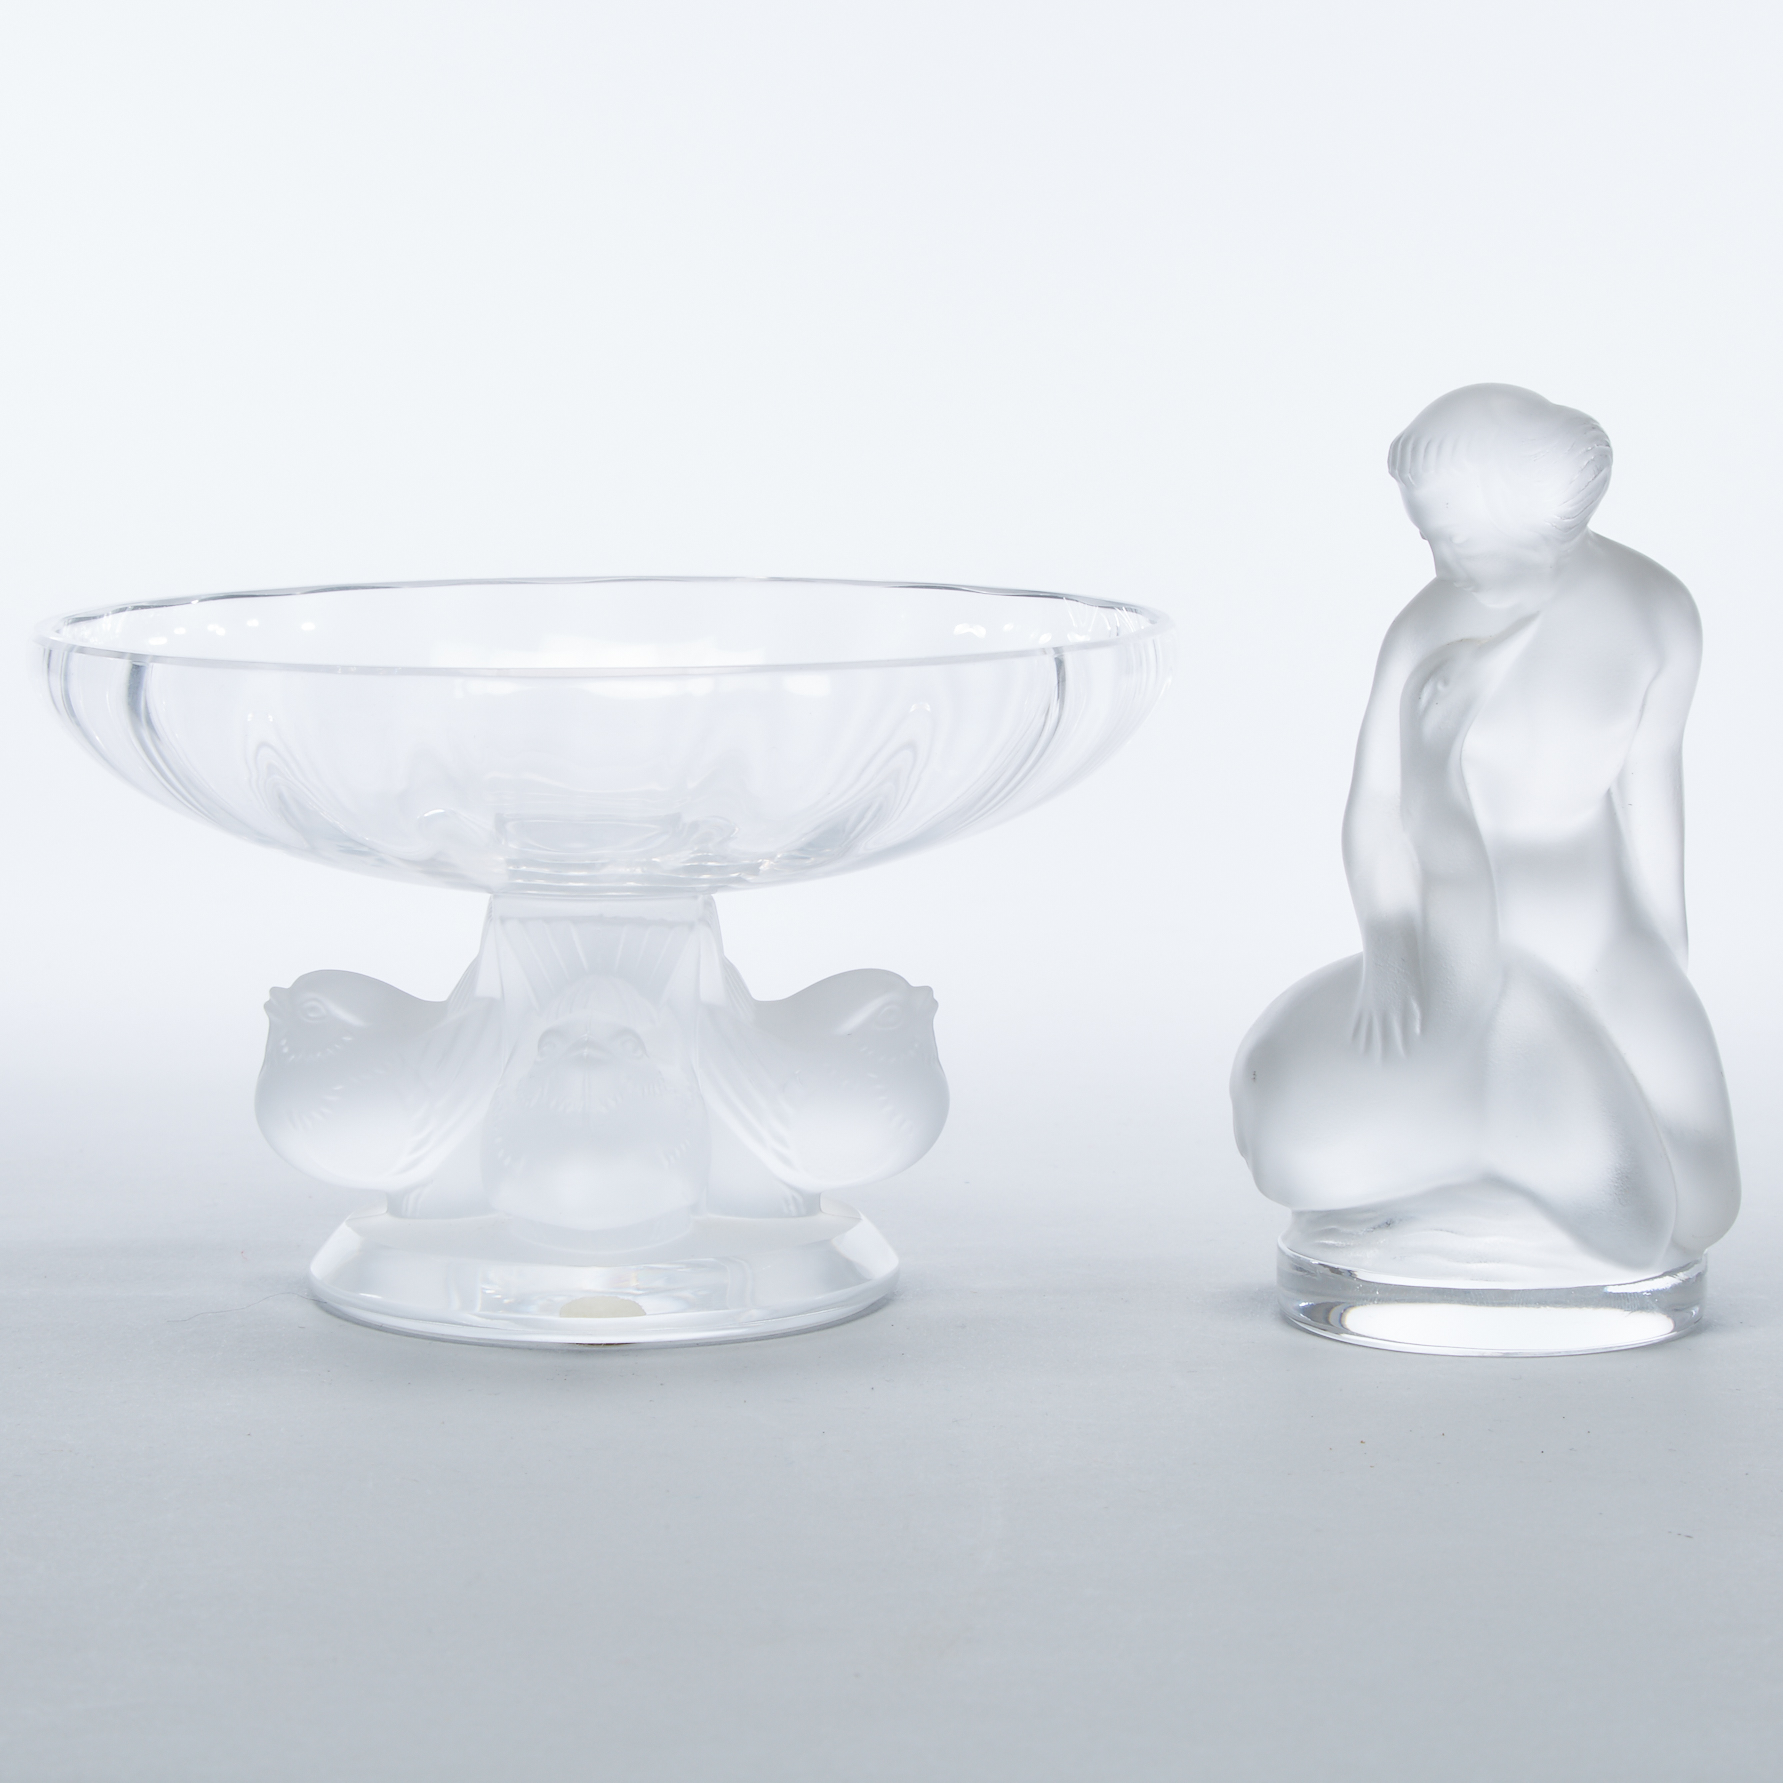 'Nogent', Lalique Moulded and Partly Frosted Glass Bowl and a Model of Leda and the Swan, post-1945